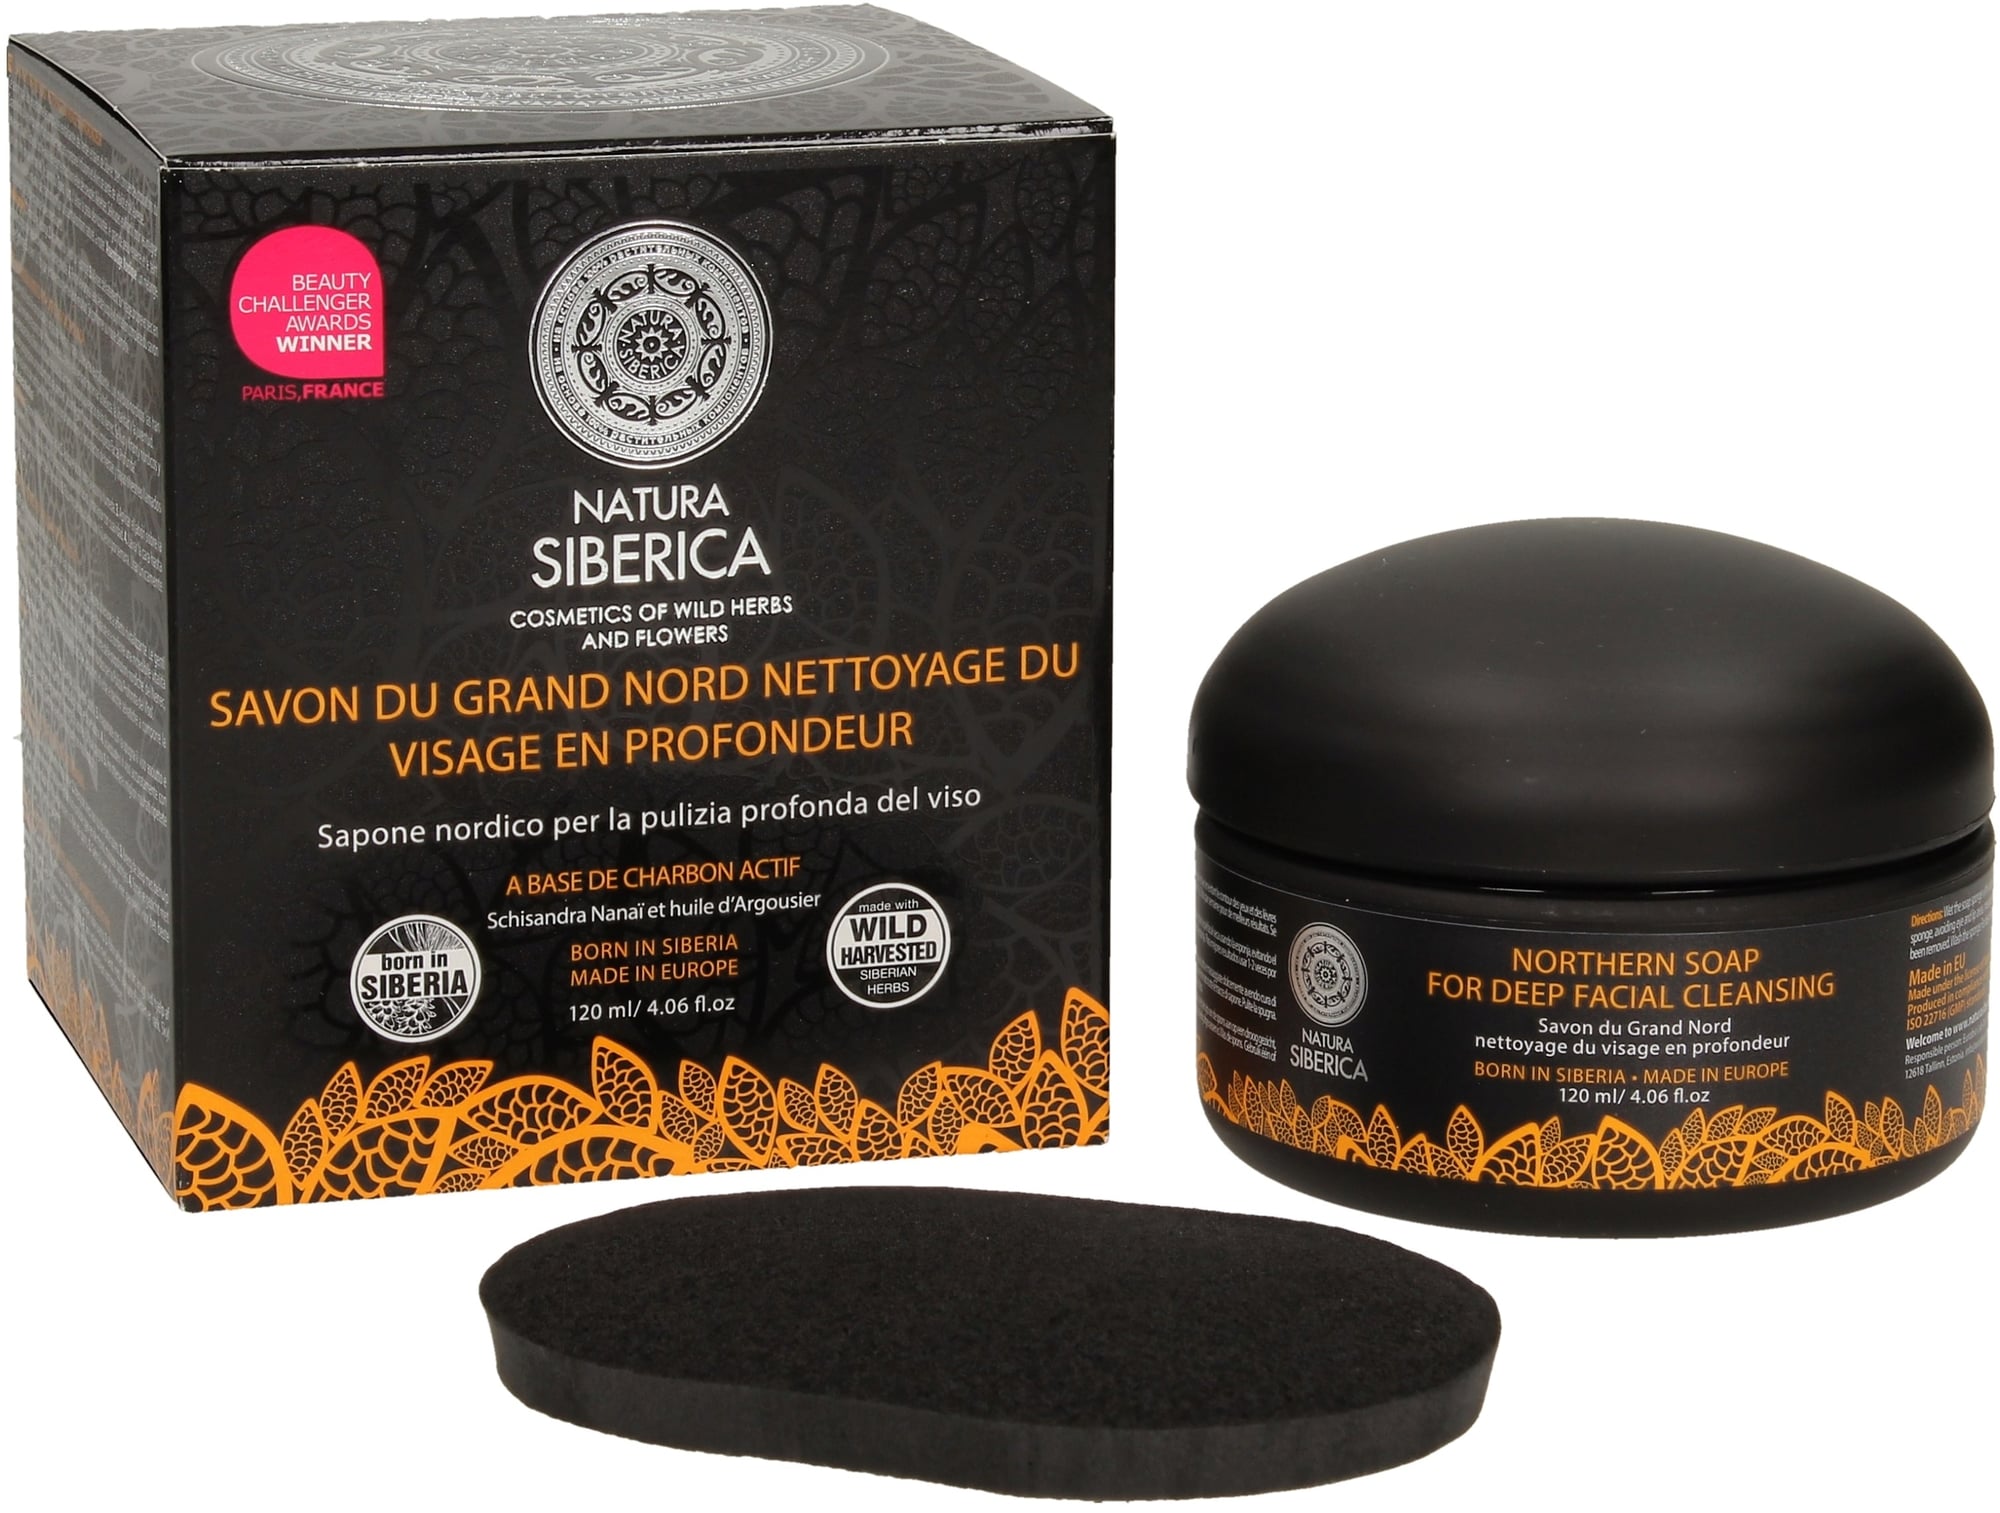 Northern Black Soap - Detox for Deep Facial Cleansing